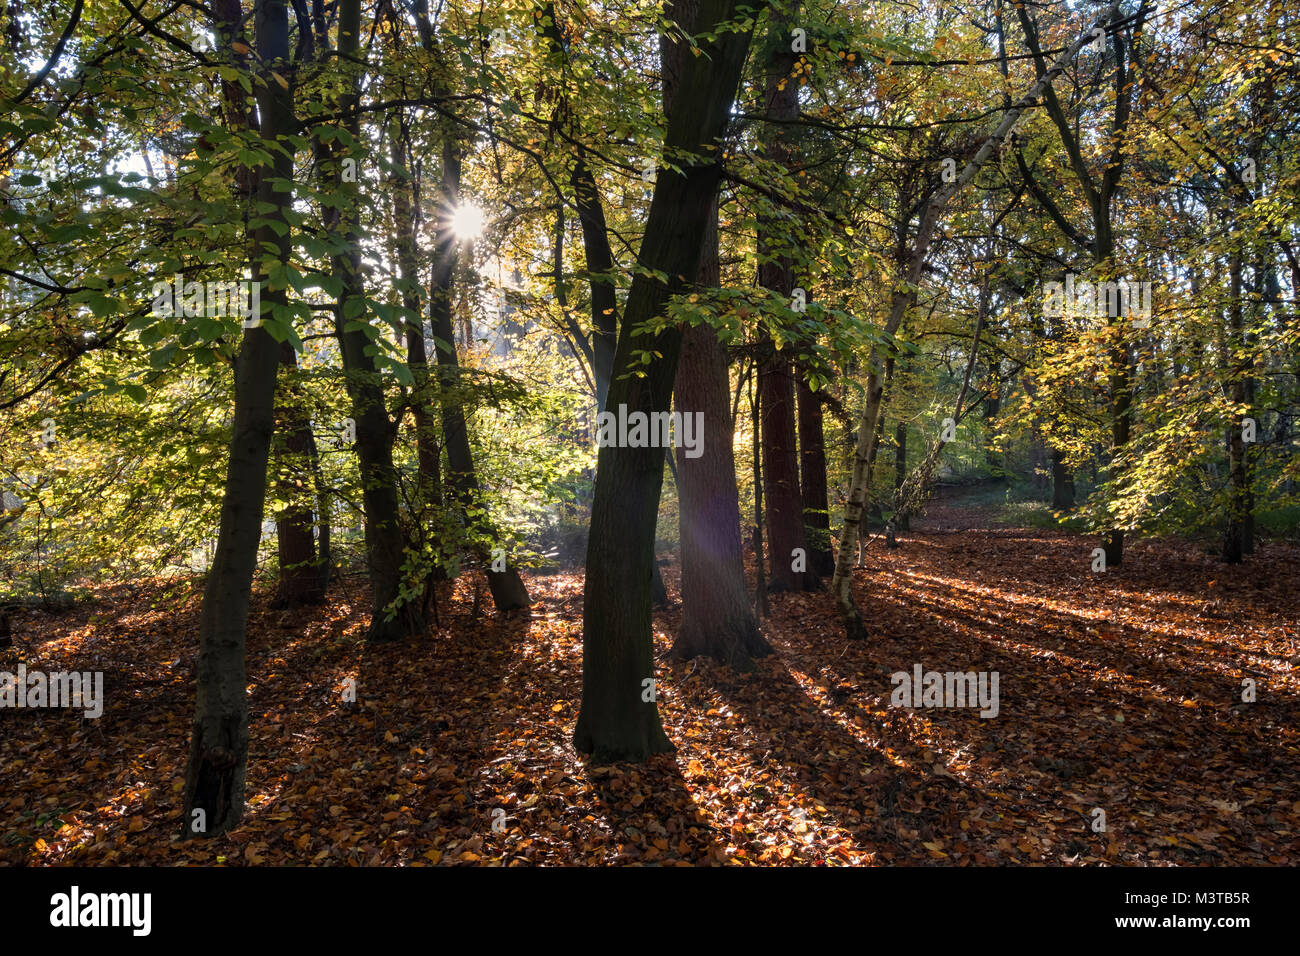 Sunrays, Delamere Forest in autumn, Delamere, Cheshire, England, UK Stock Photo